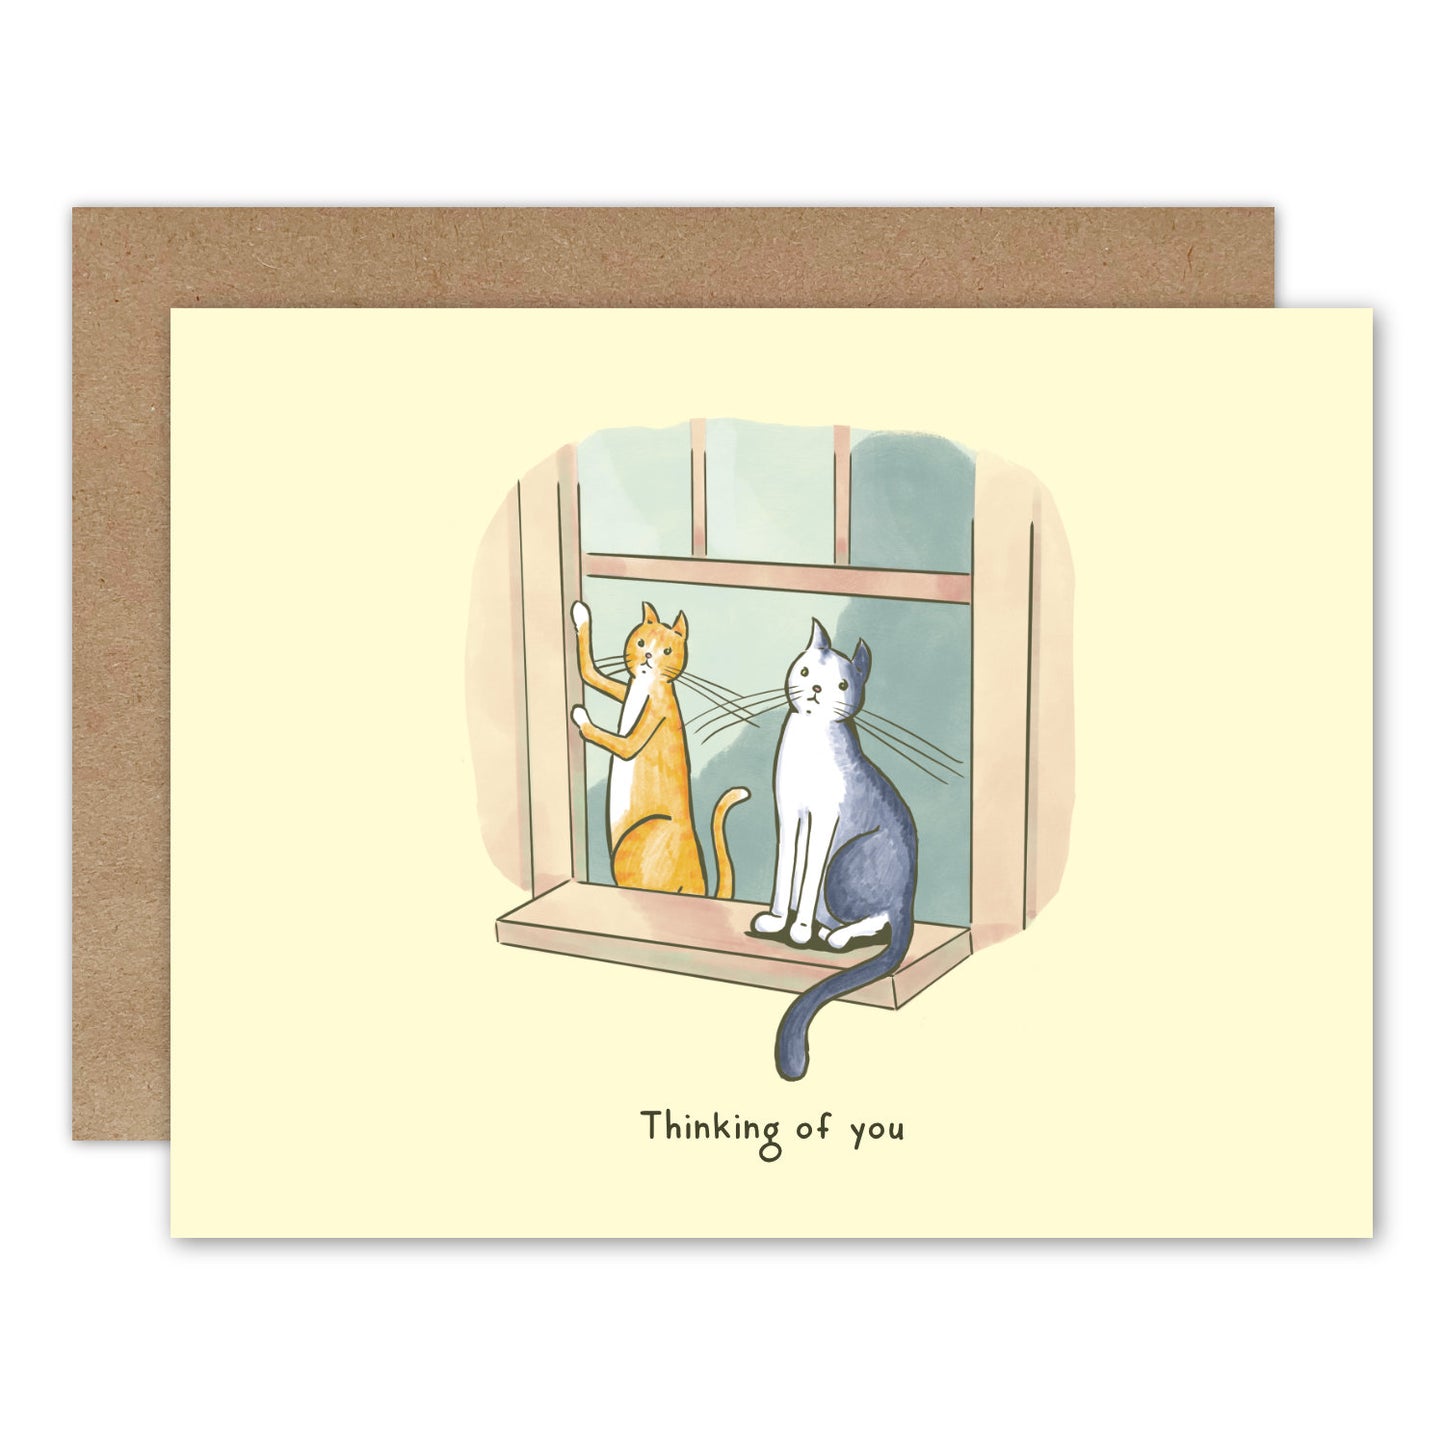 Fred + Nym Thinking of You Card